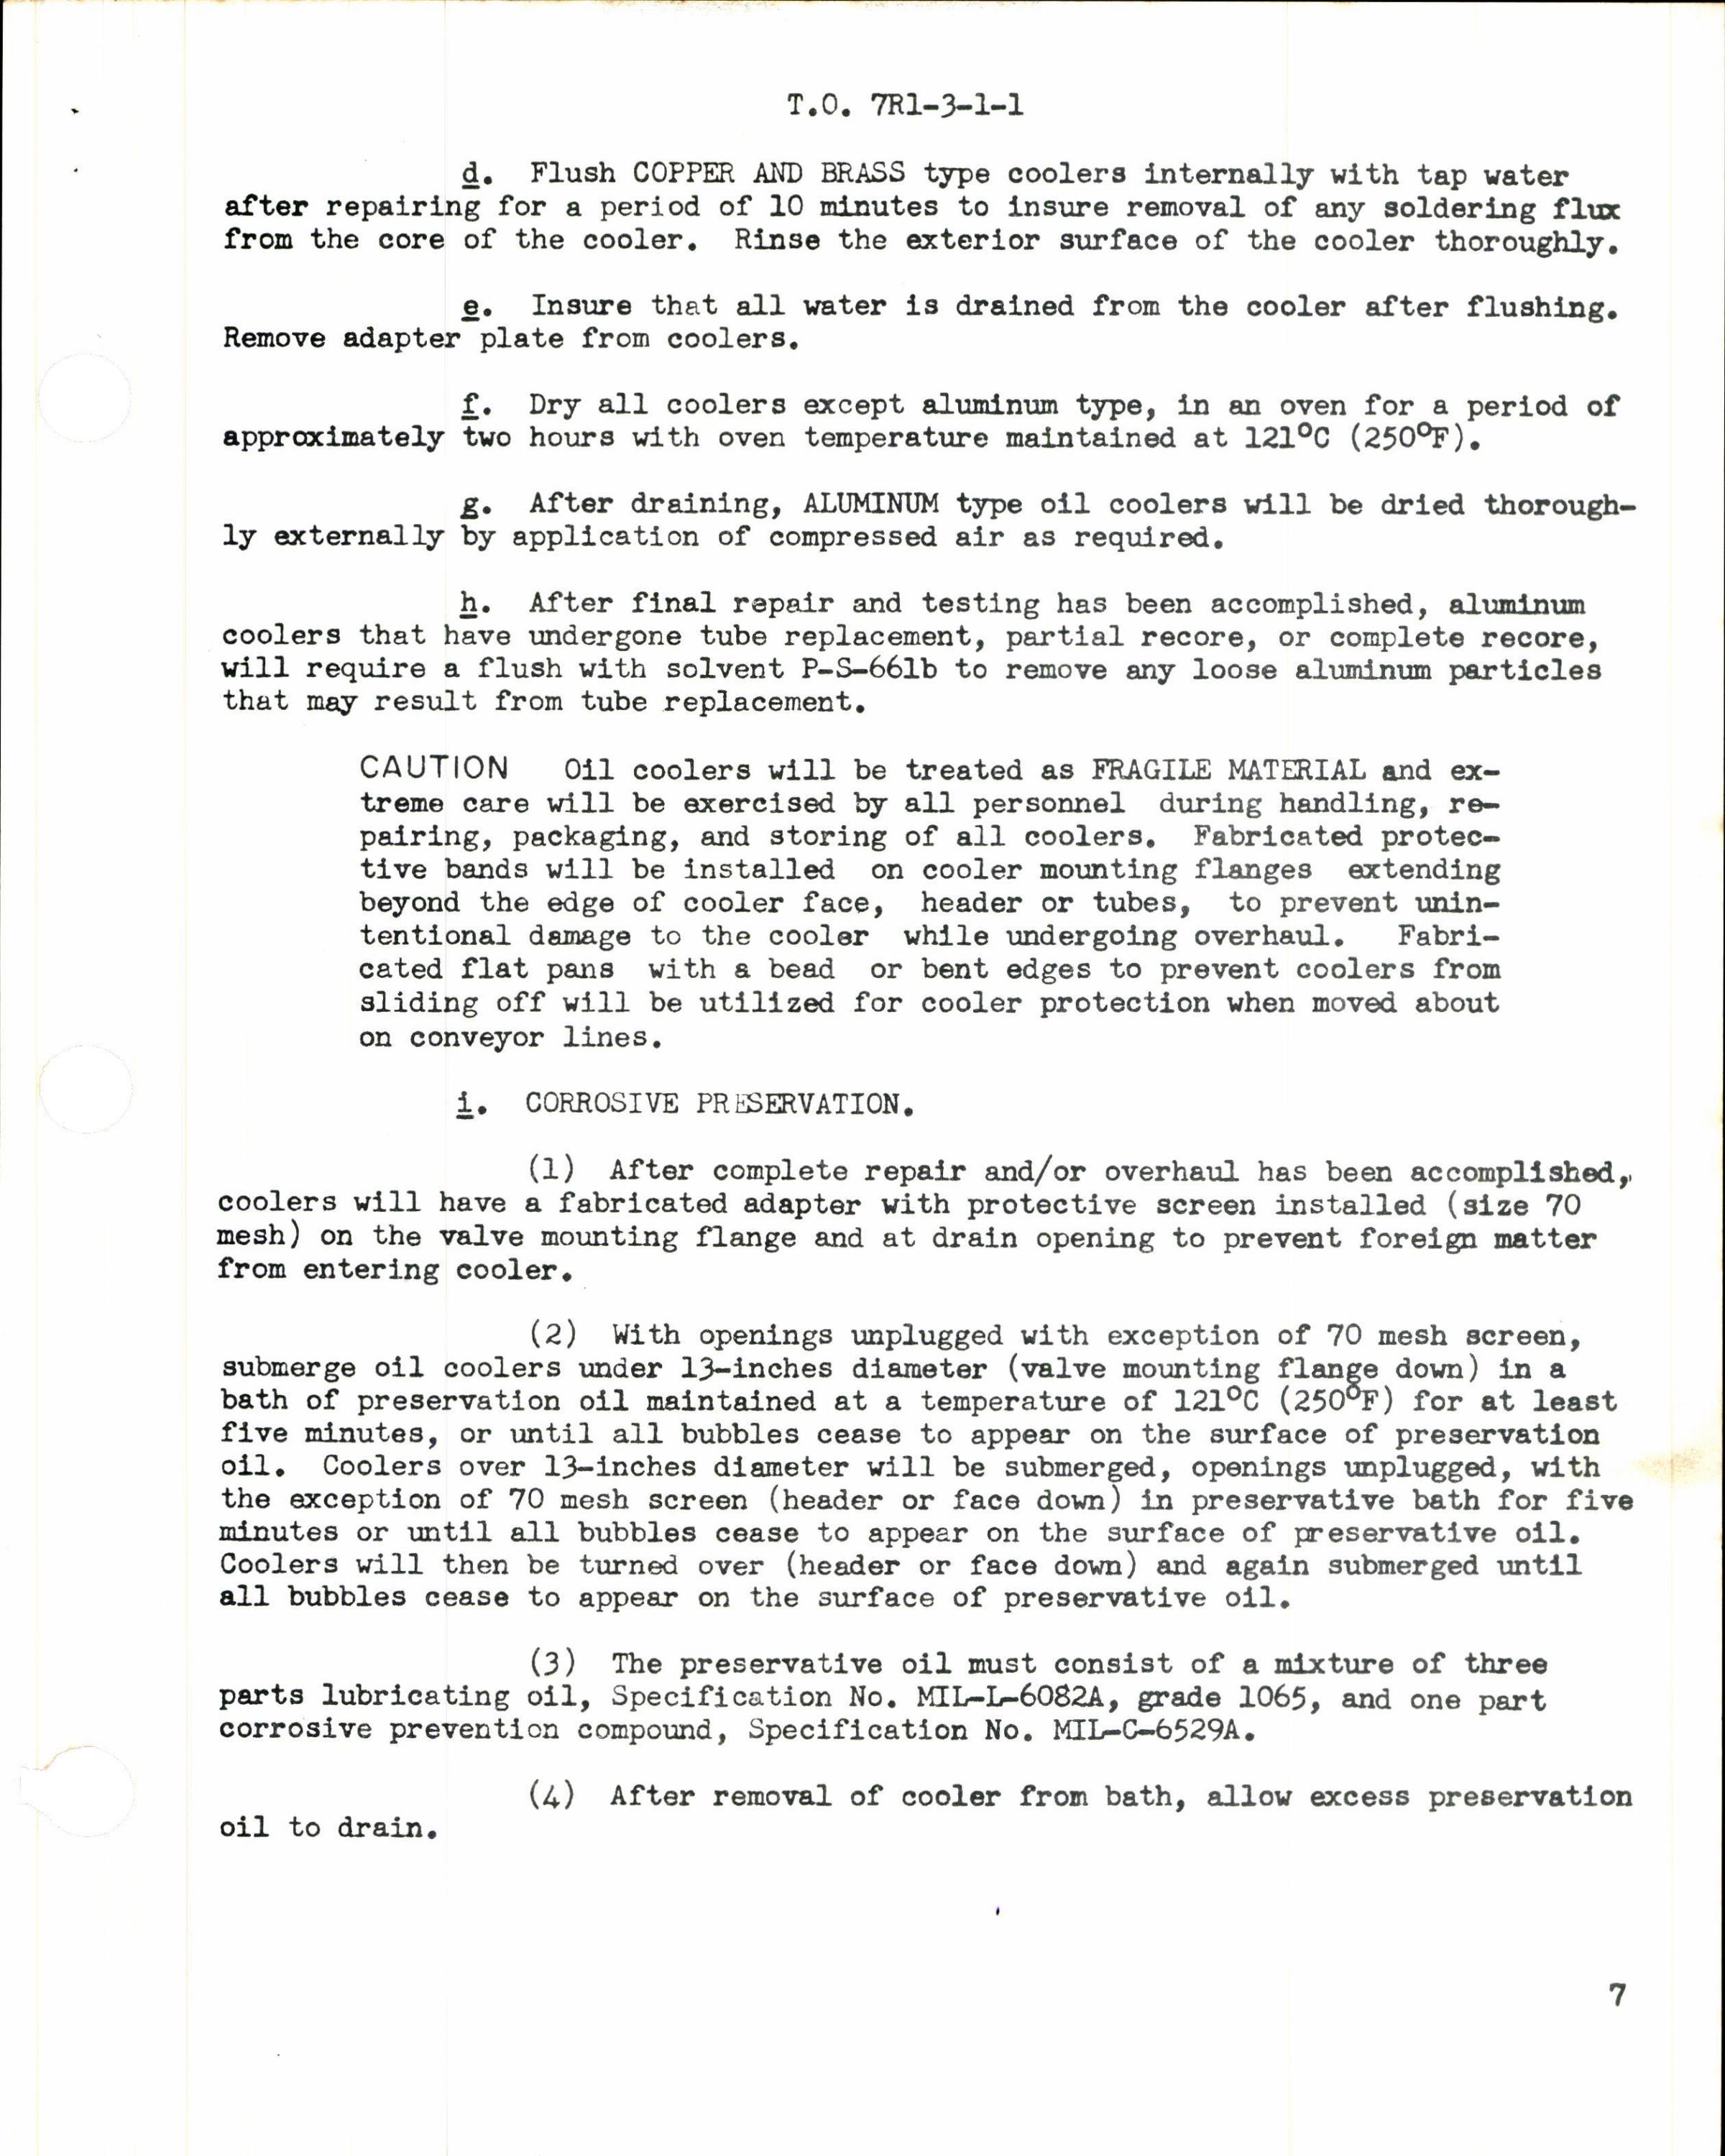 Sample page 7 from AirCorps Library document: Cleaning, Testing, and Corrosive Treatment of Air to Oil, Cooled Aluminum, Brass and Copper type Oil Coolers